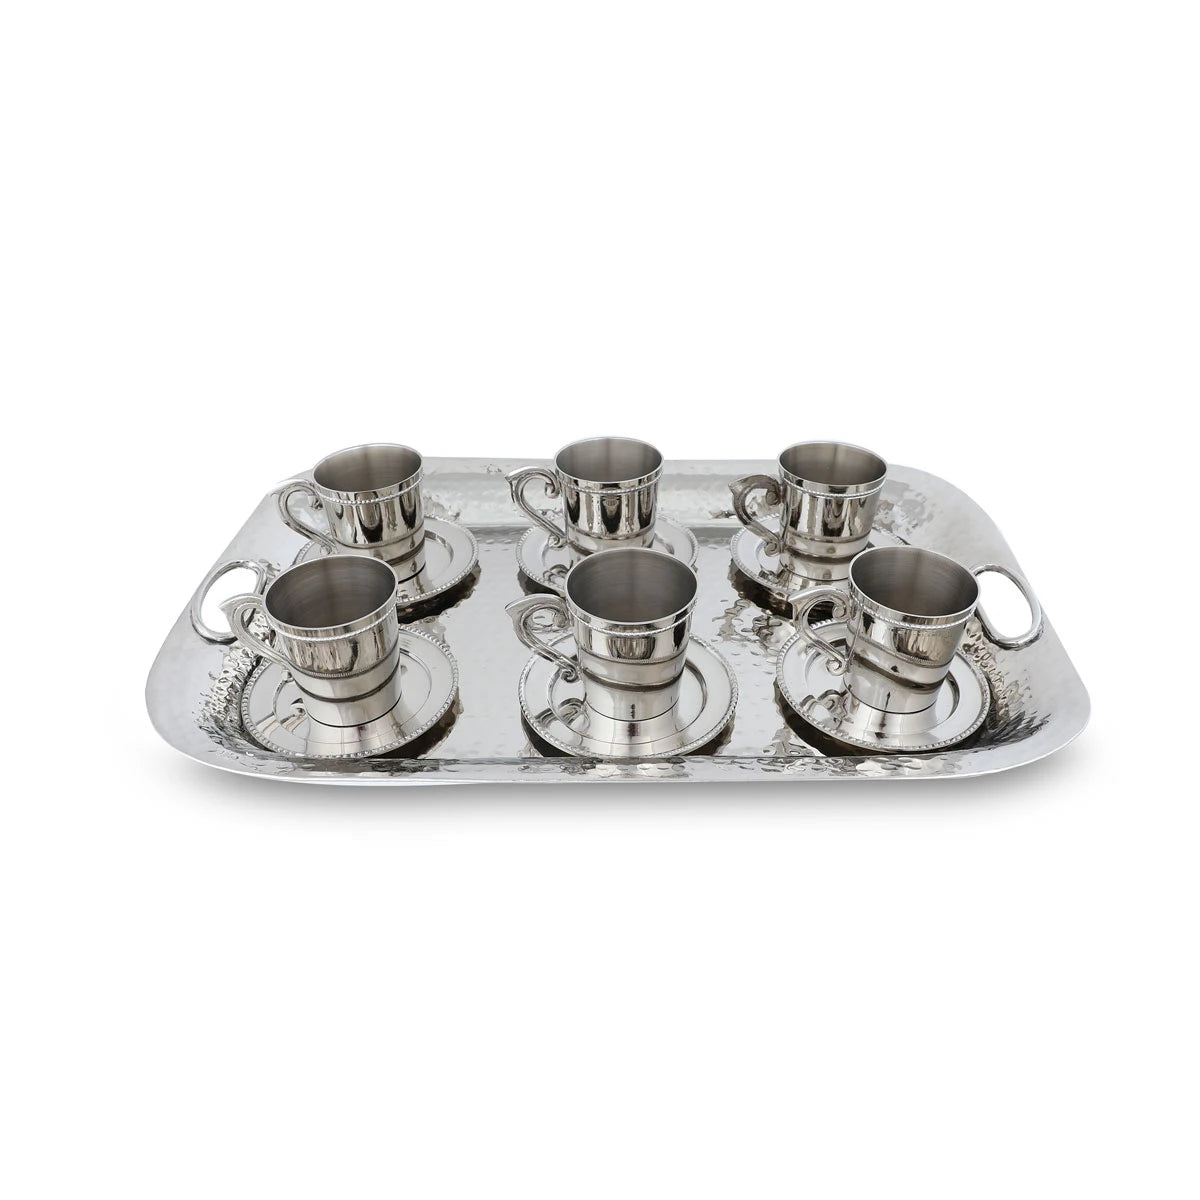 Top Angle View of Turkish Coffee Cup & Saucer Set - Silver